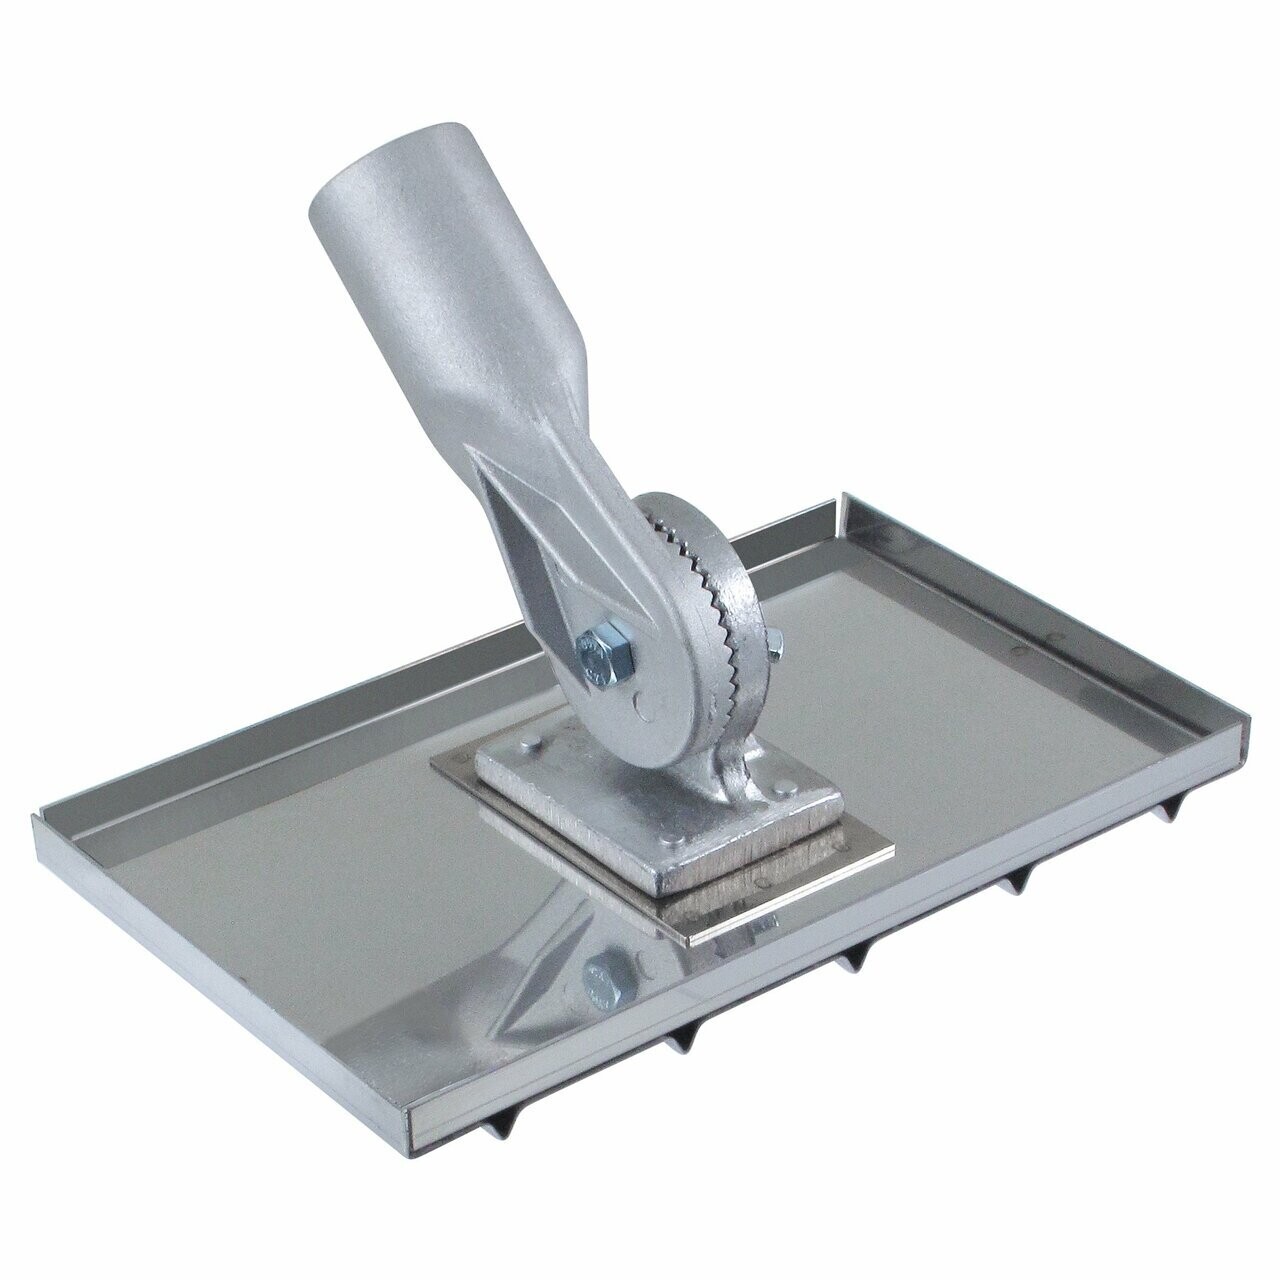 Kraft CC919BT 10"x 6" Wheelchair Walking Groover (5 grooves) 2" on Center with Button Handle Socket Pack of 2